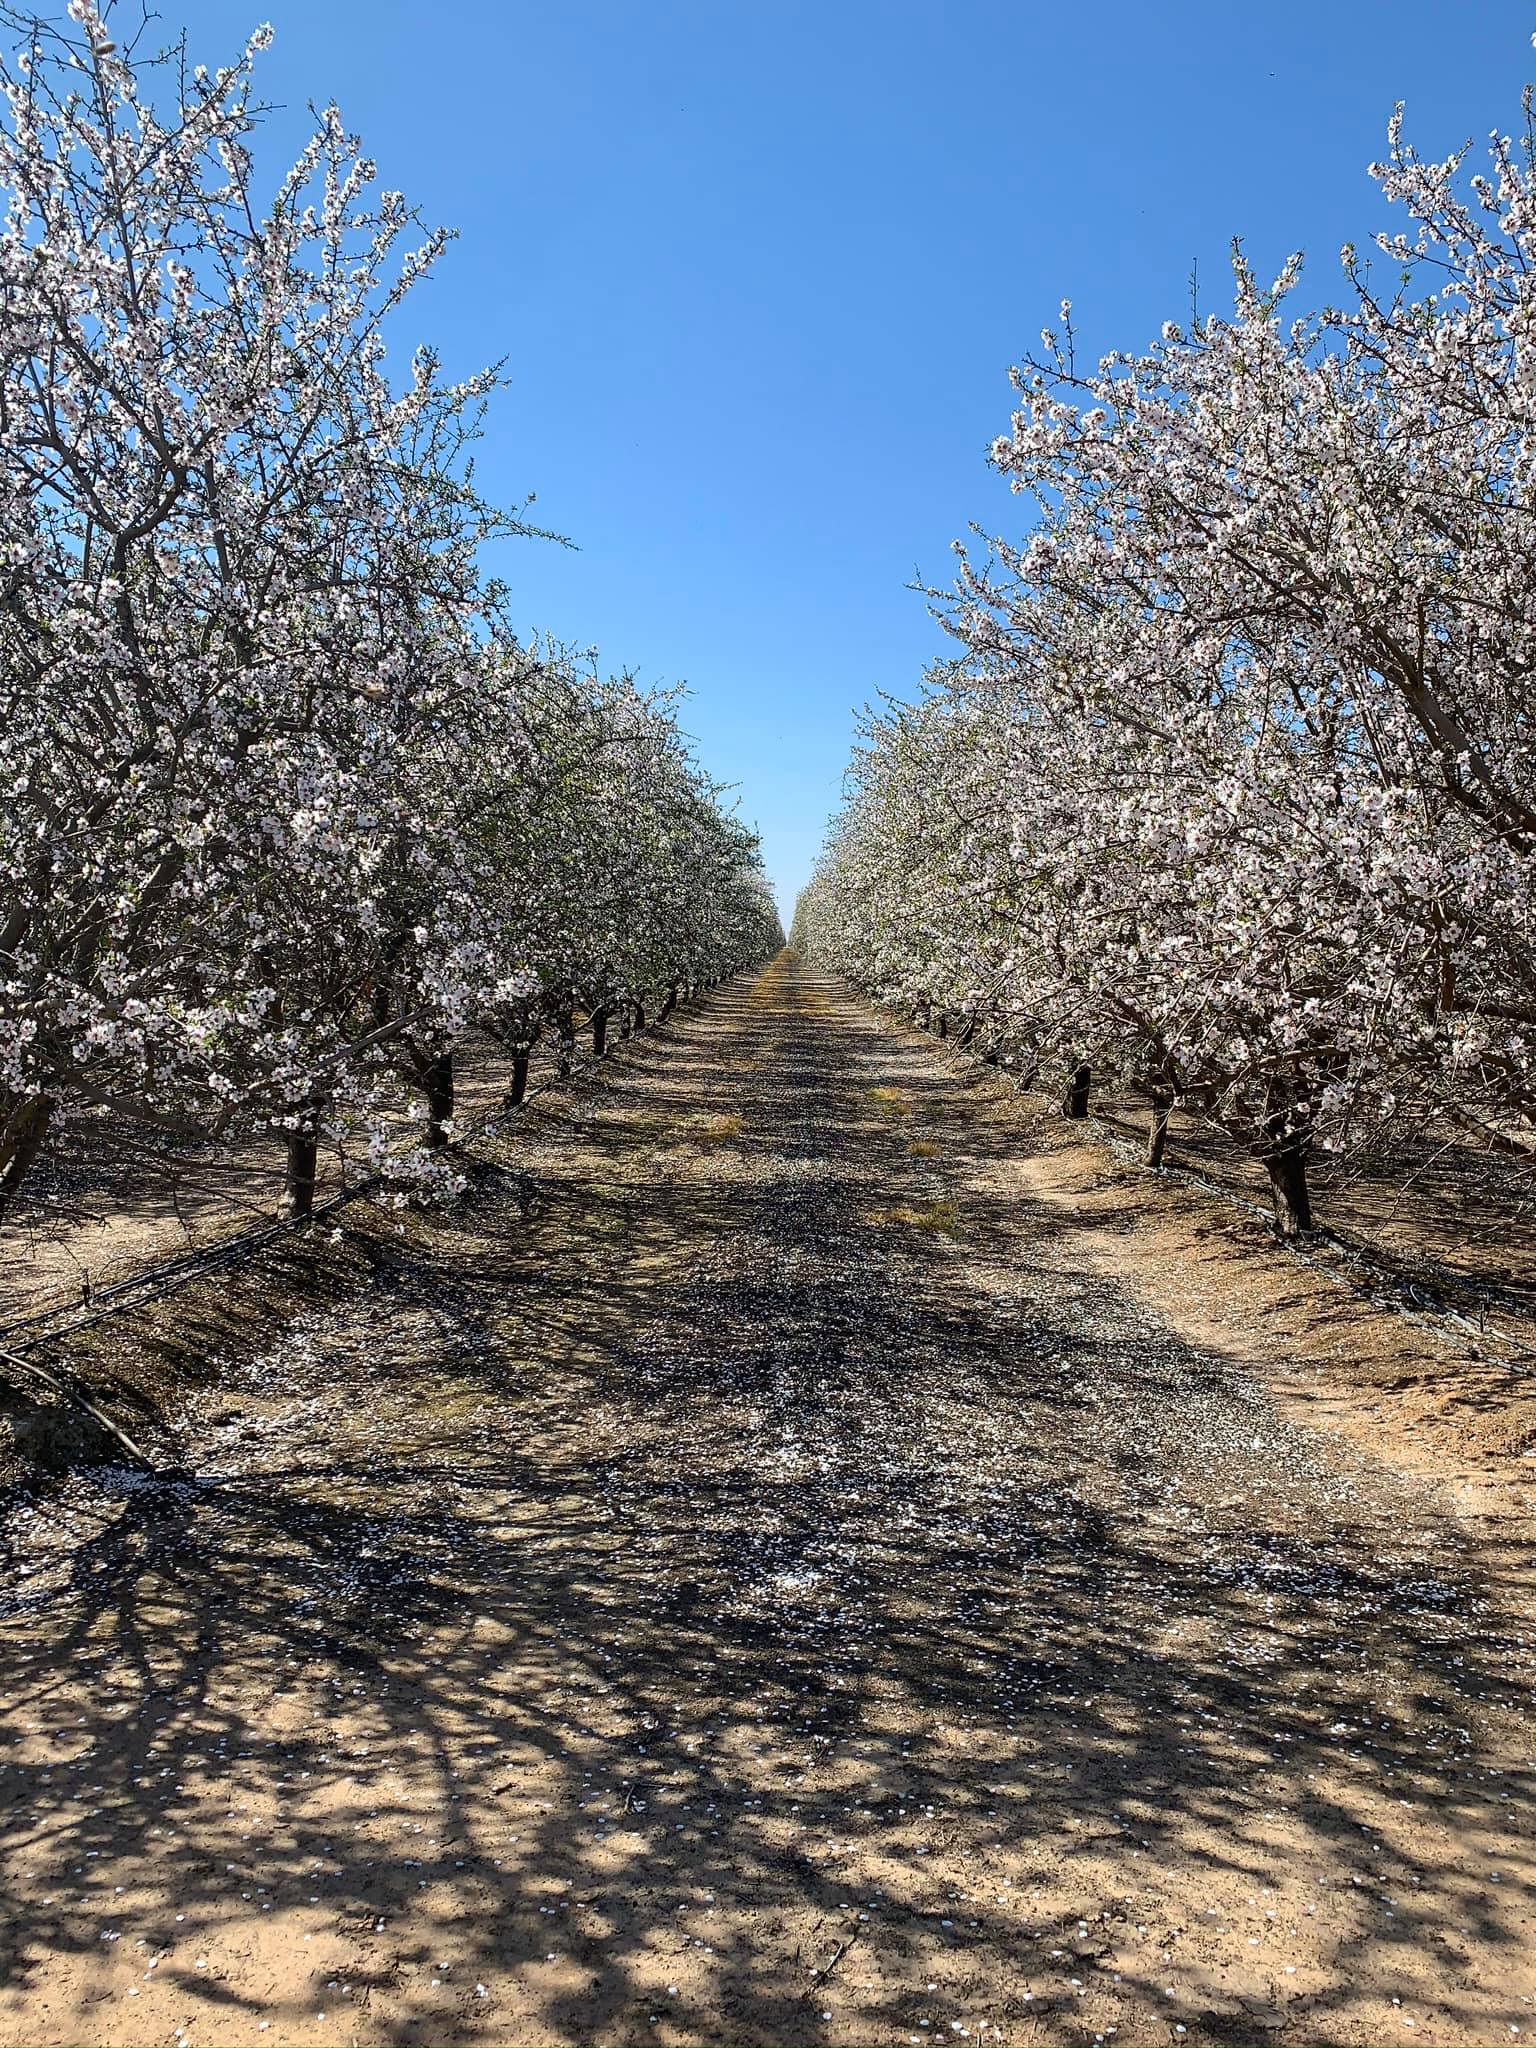 A row of blossoming trees in an orchard.